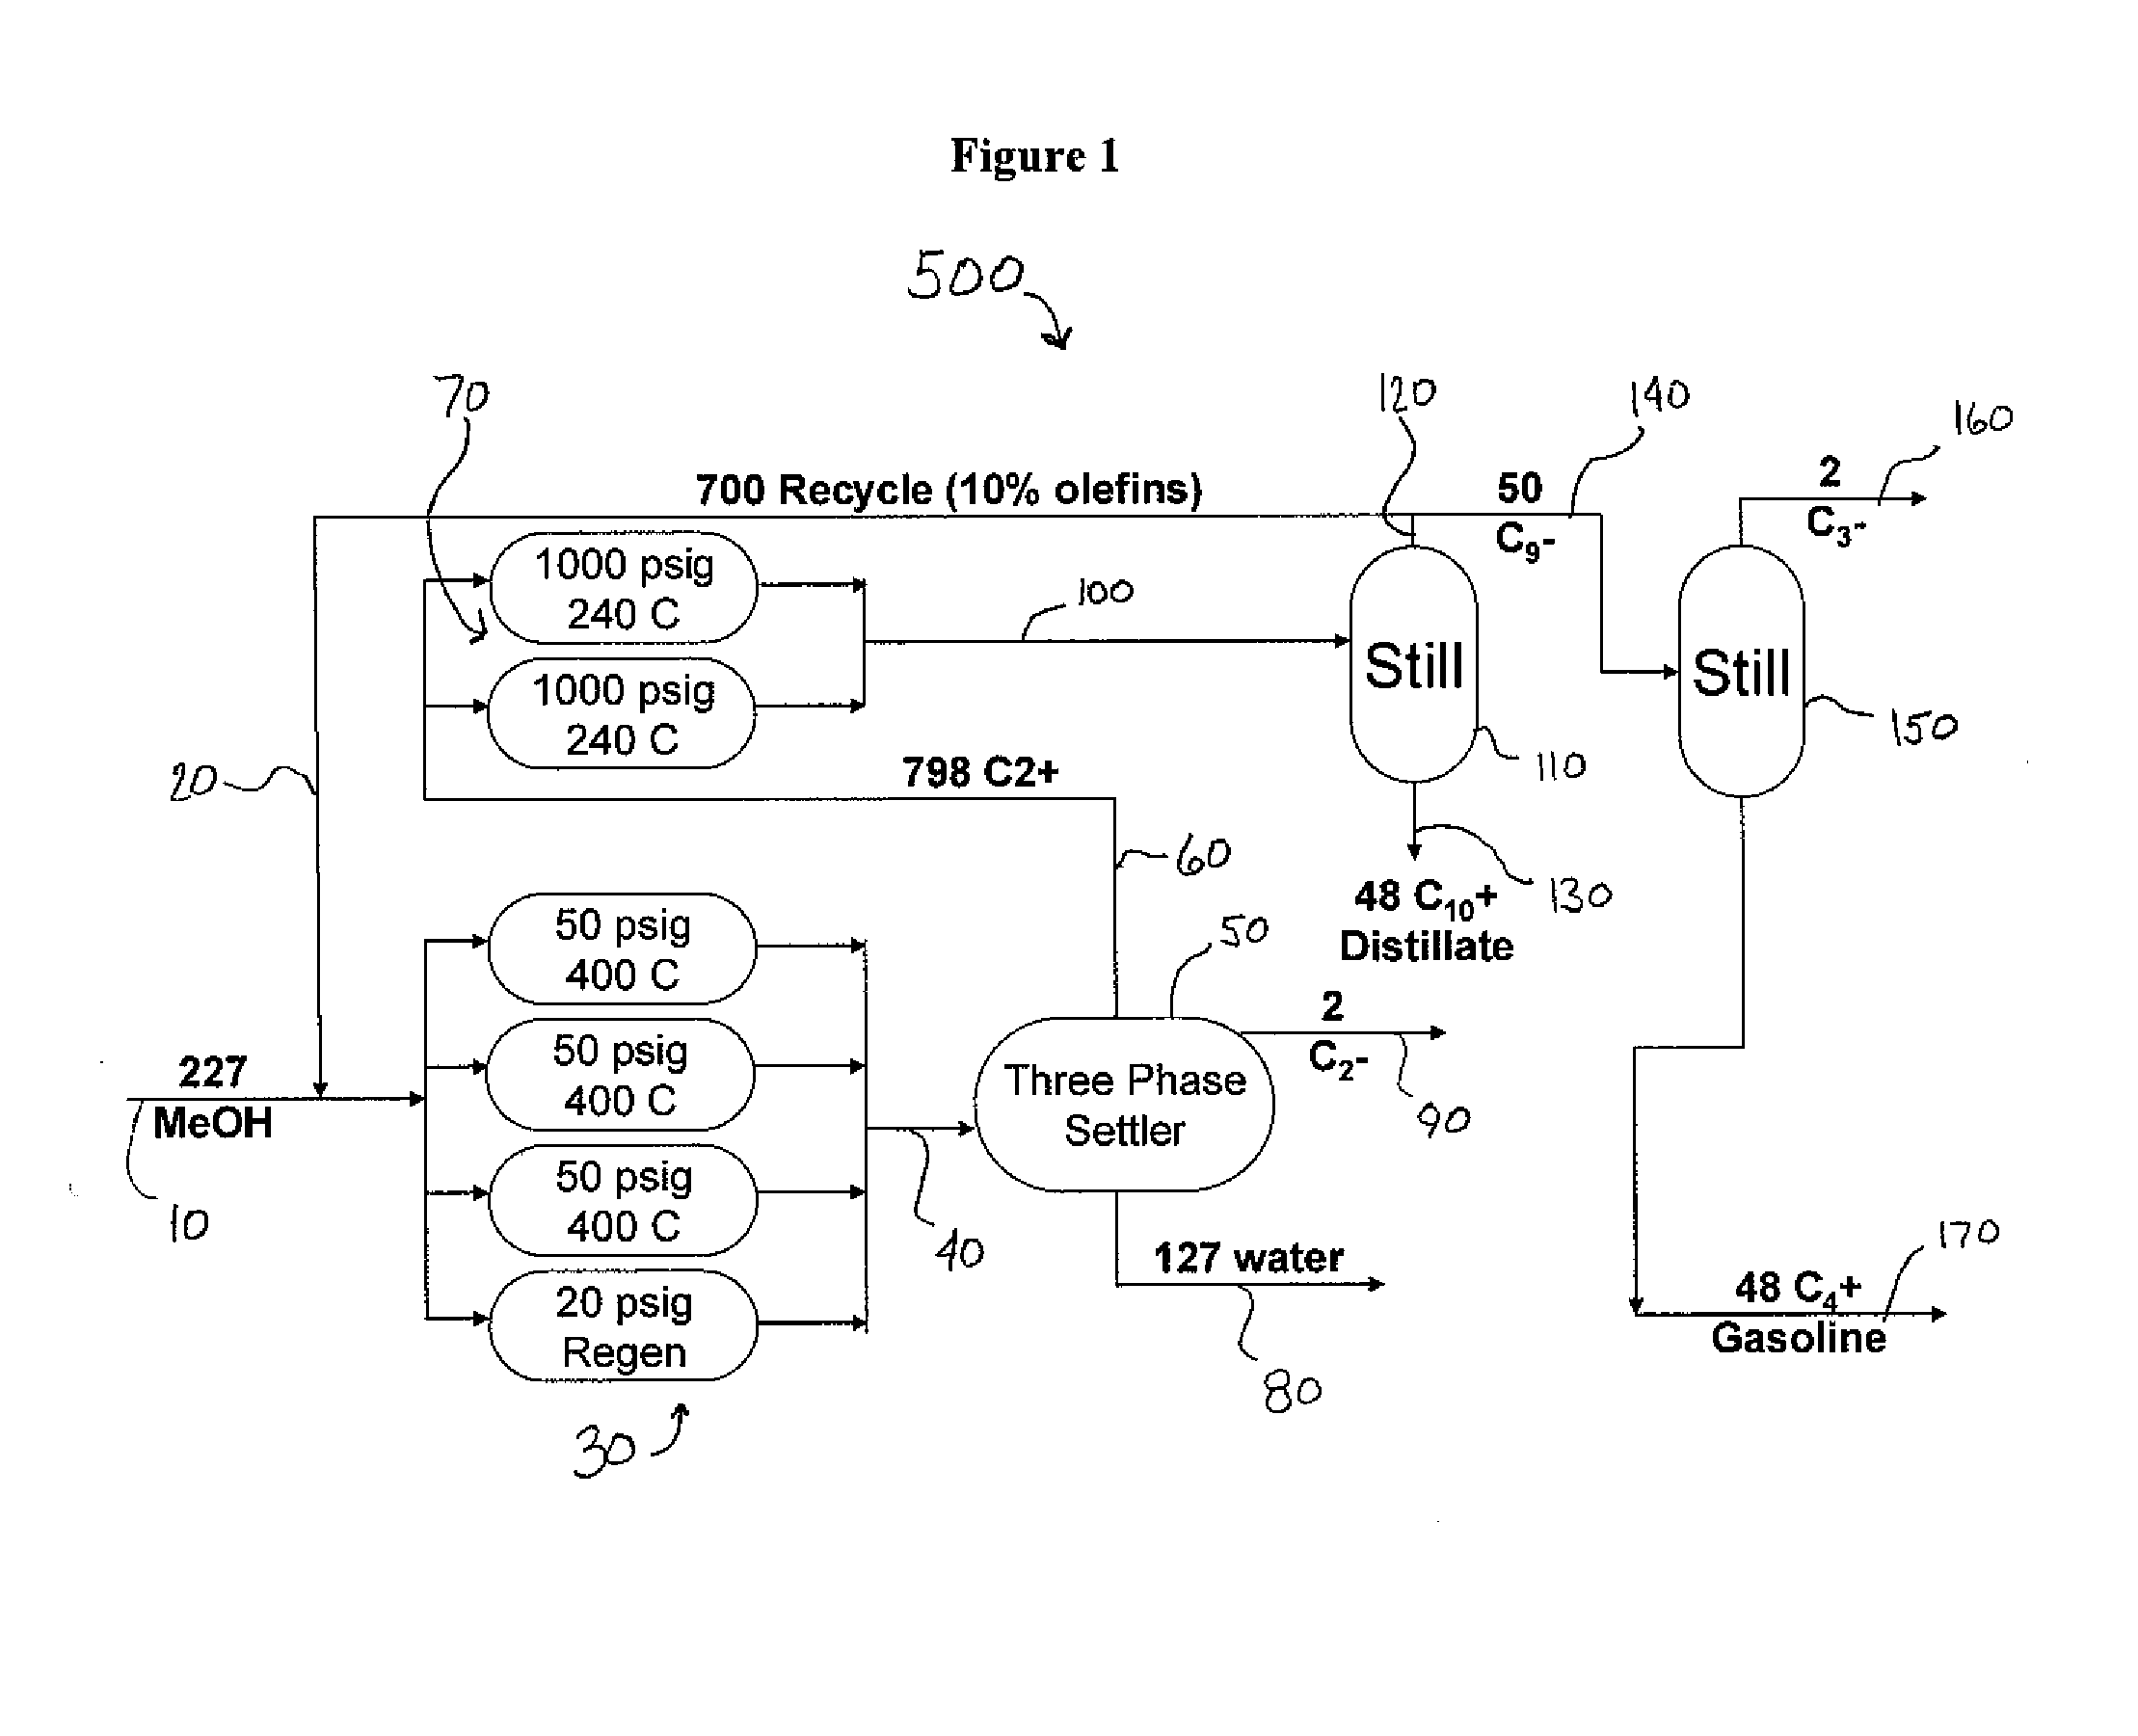 Process and system to convert methanol to light olefin, gasoline and distillate